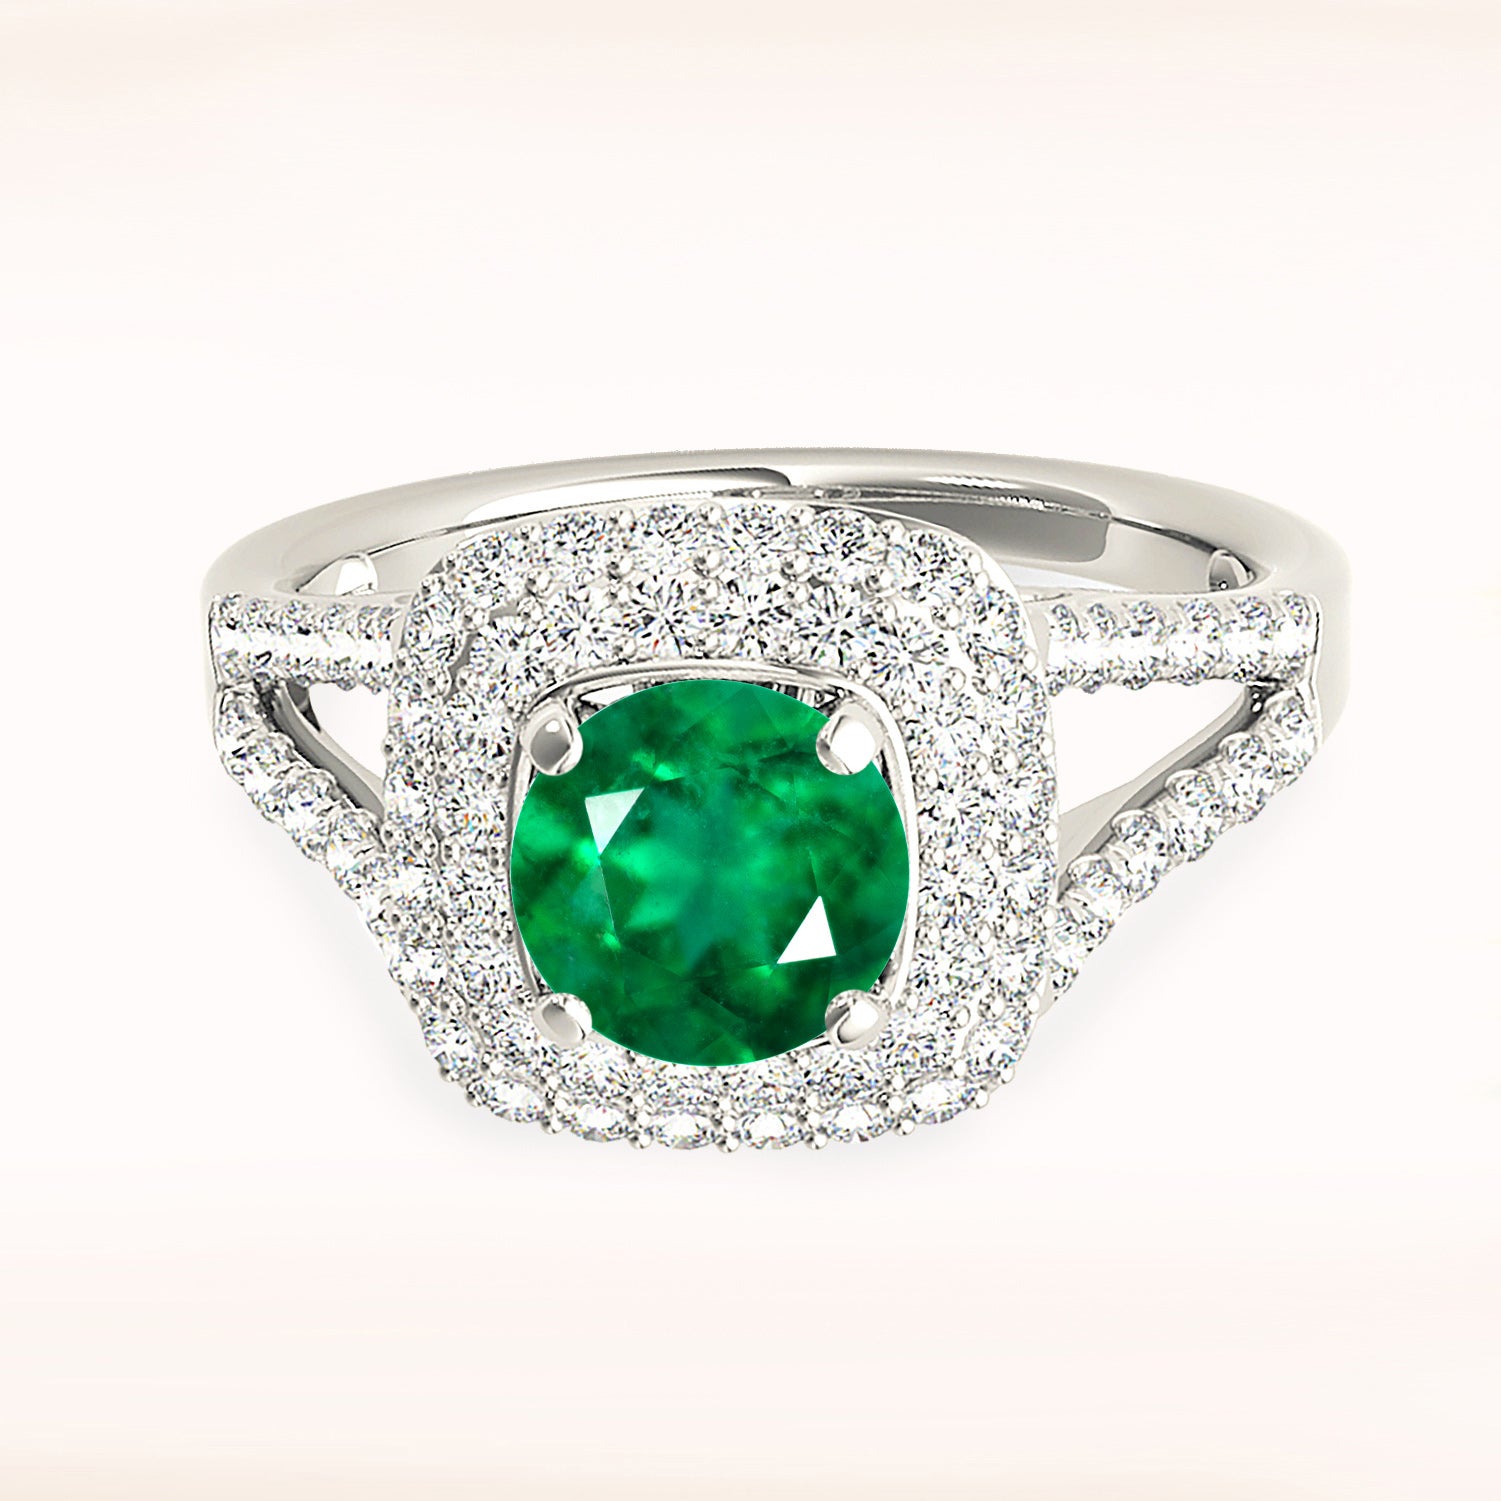 1.14 ct. Genuine Emerald Ring With 0.70 ctw. Double Row Diamond Halo,Wide Split Diamond Band-in 14K/18K White, Yellow, Rose Gold and Platinum - Christmas Jewelry Gift -VIRABYANI